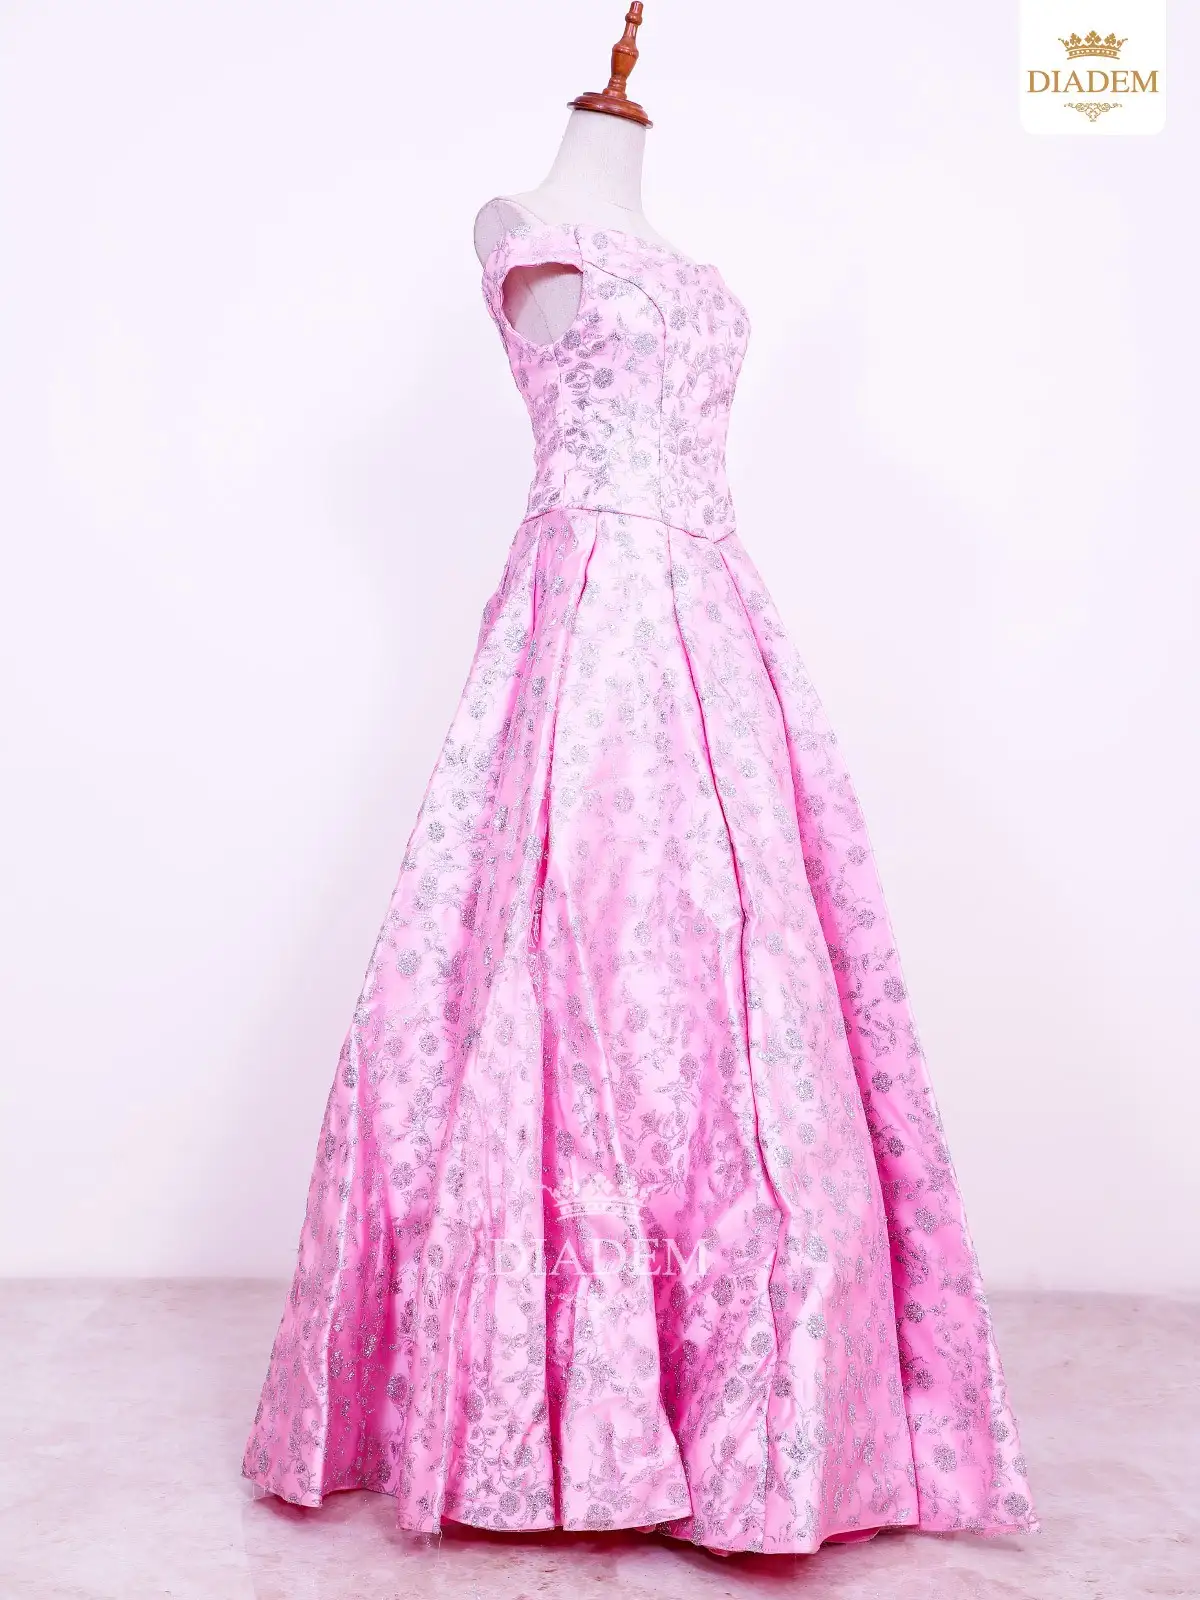 Valentine Pink Bridal Gown Embellished In Floral Design Stones And Beads